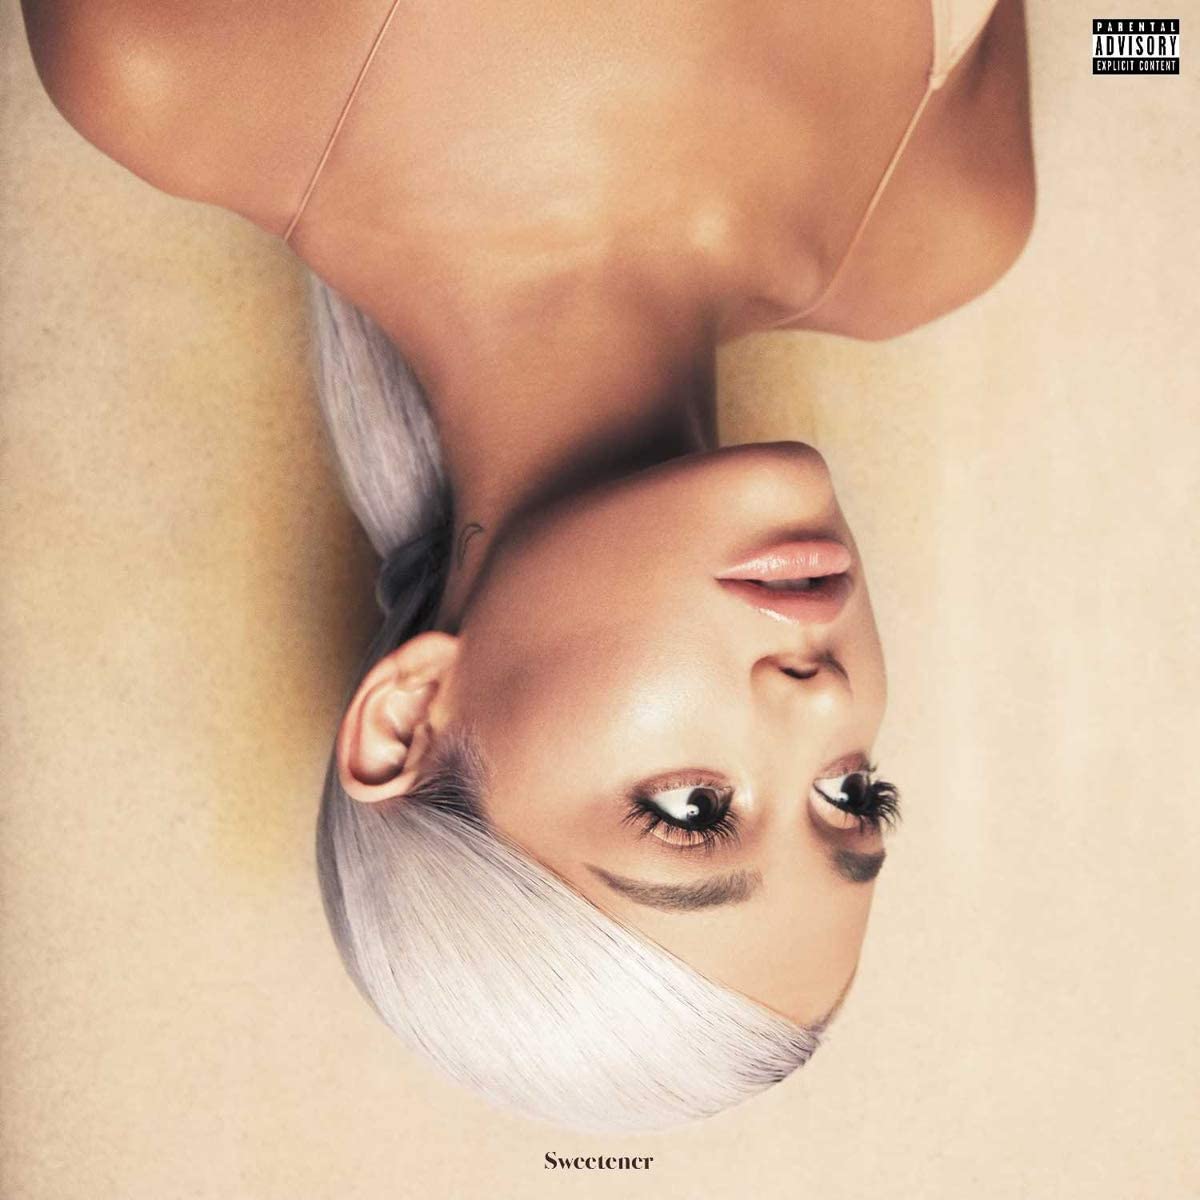 The fourth studio album on Vinyl by the American singer. Features the singles 'No Tears Left to Cry', 'God Is a Woman' and 'Breathin'.